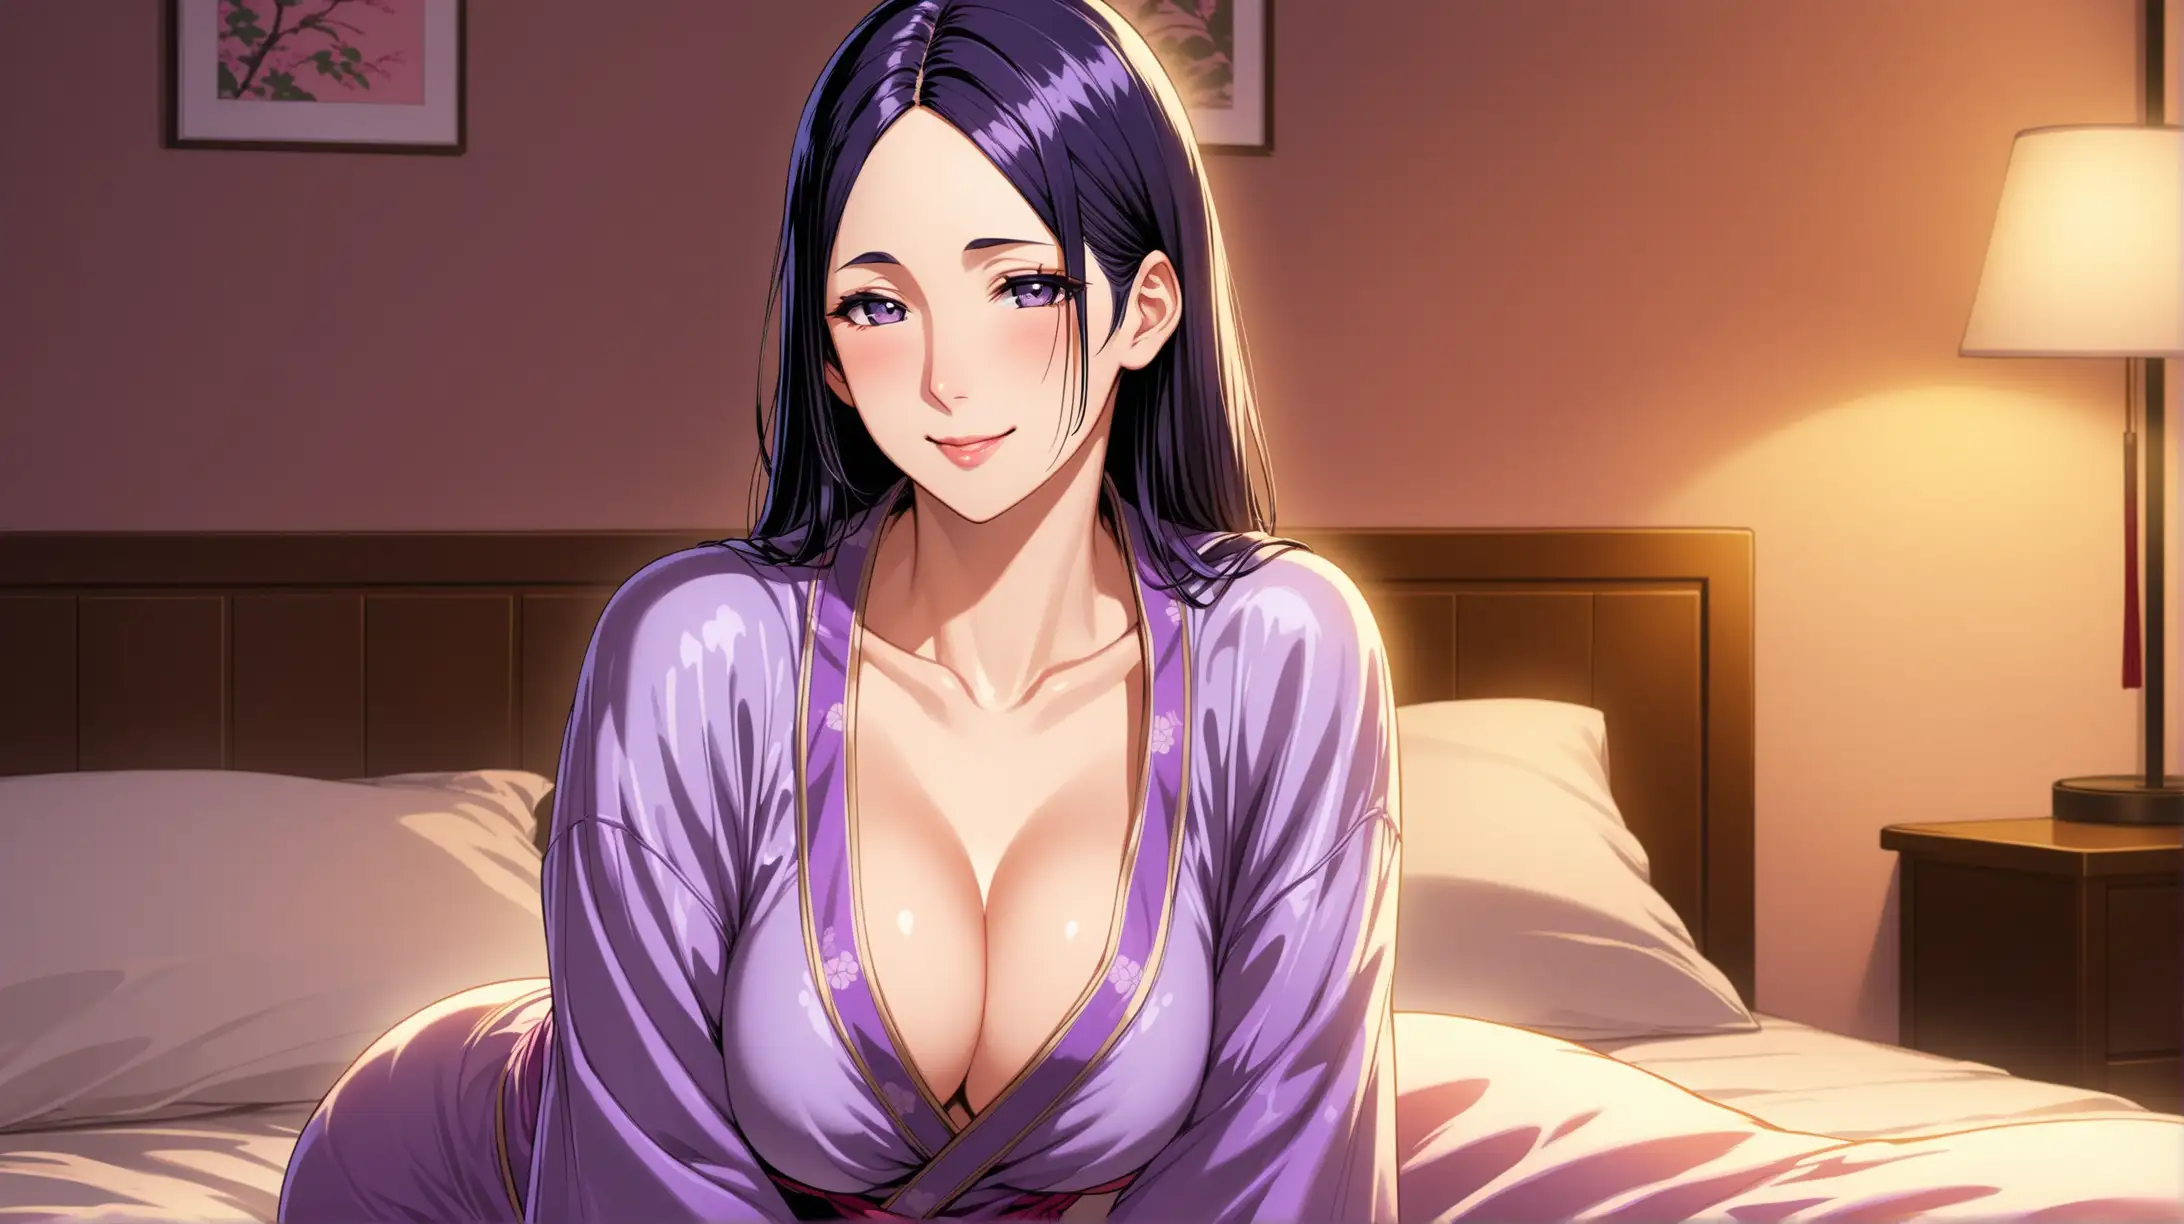 Draw the character Minamoto no Raikou, high quality, ambient lighting, long shot, indoors, bedroom, seductive pose, wearing nightwear, smiling at the viewer